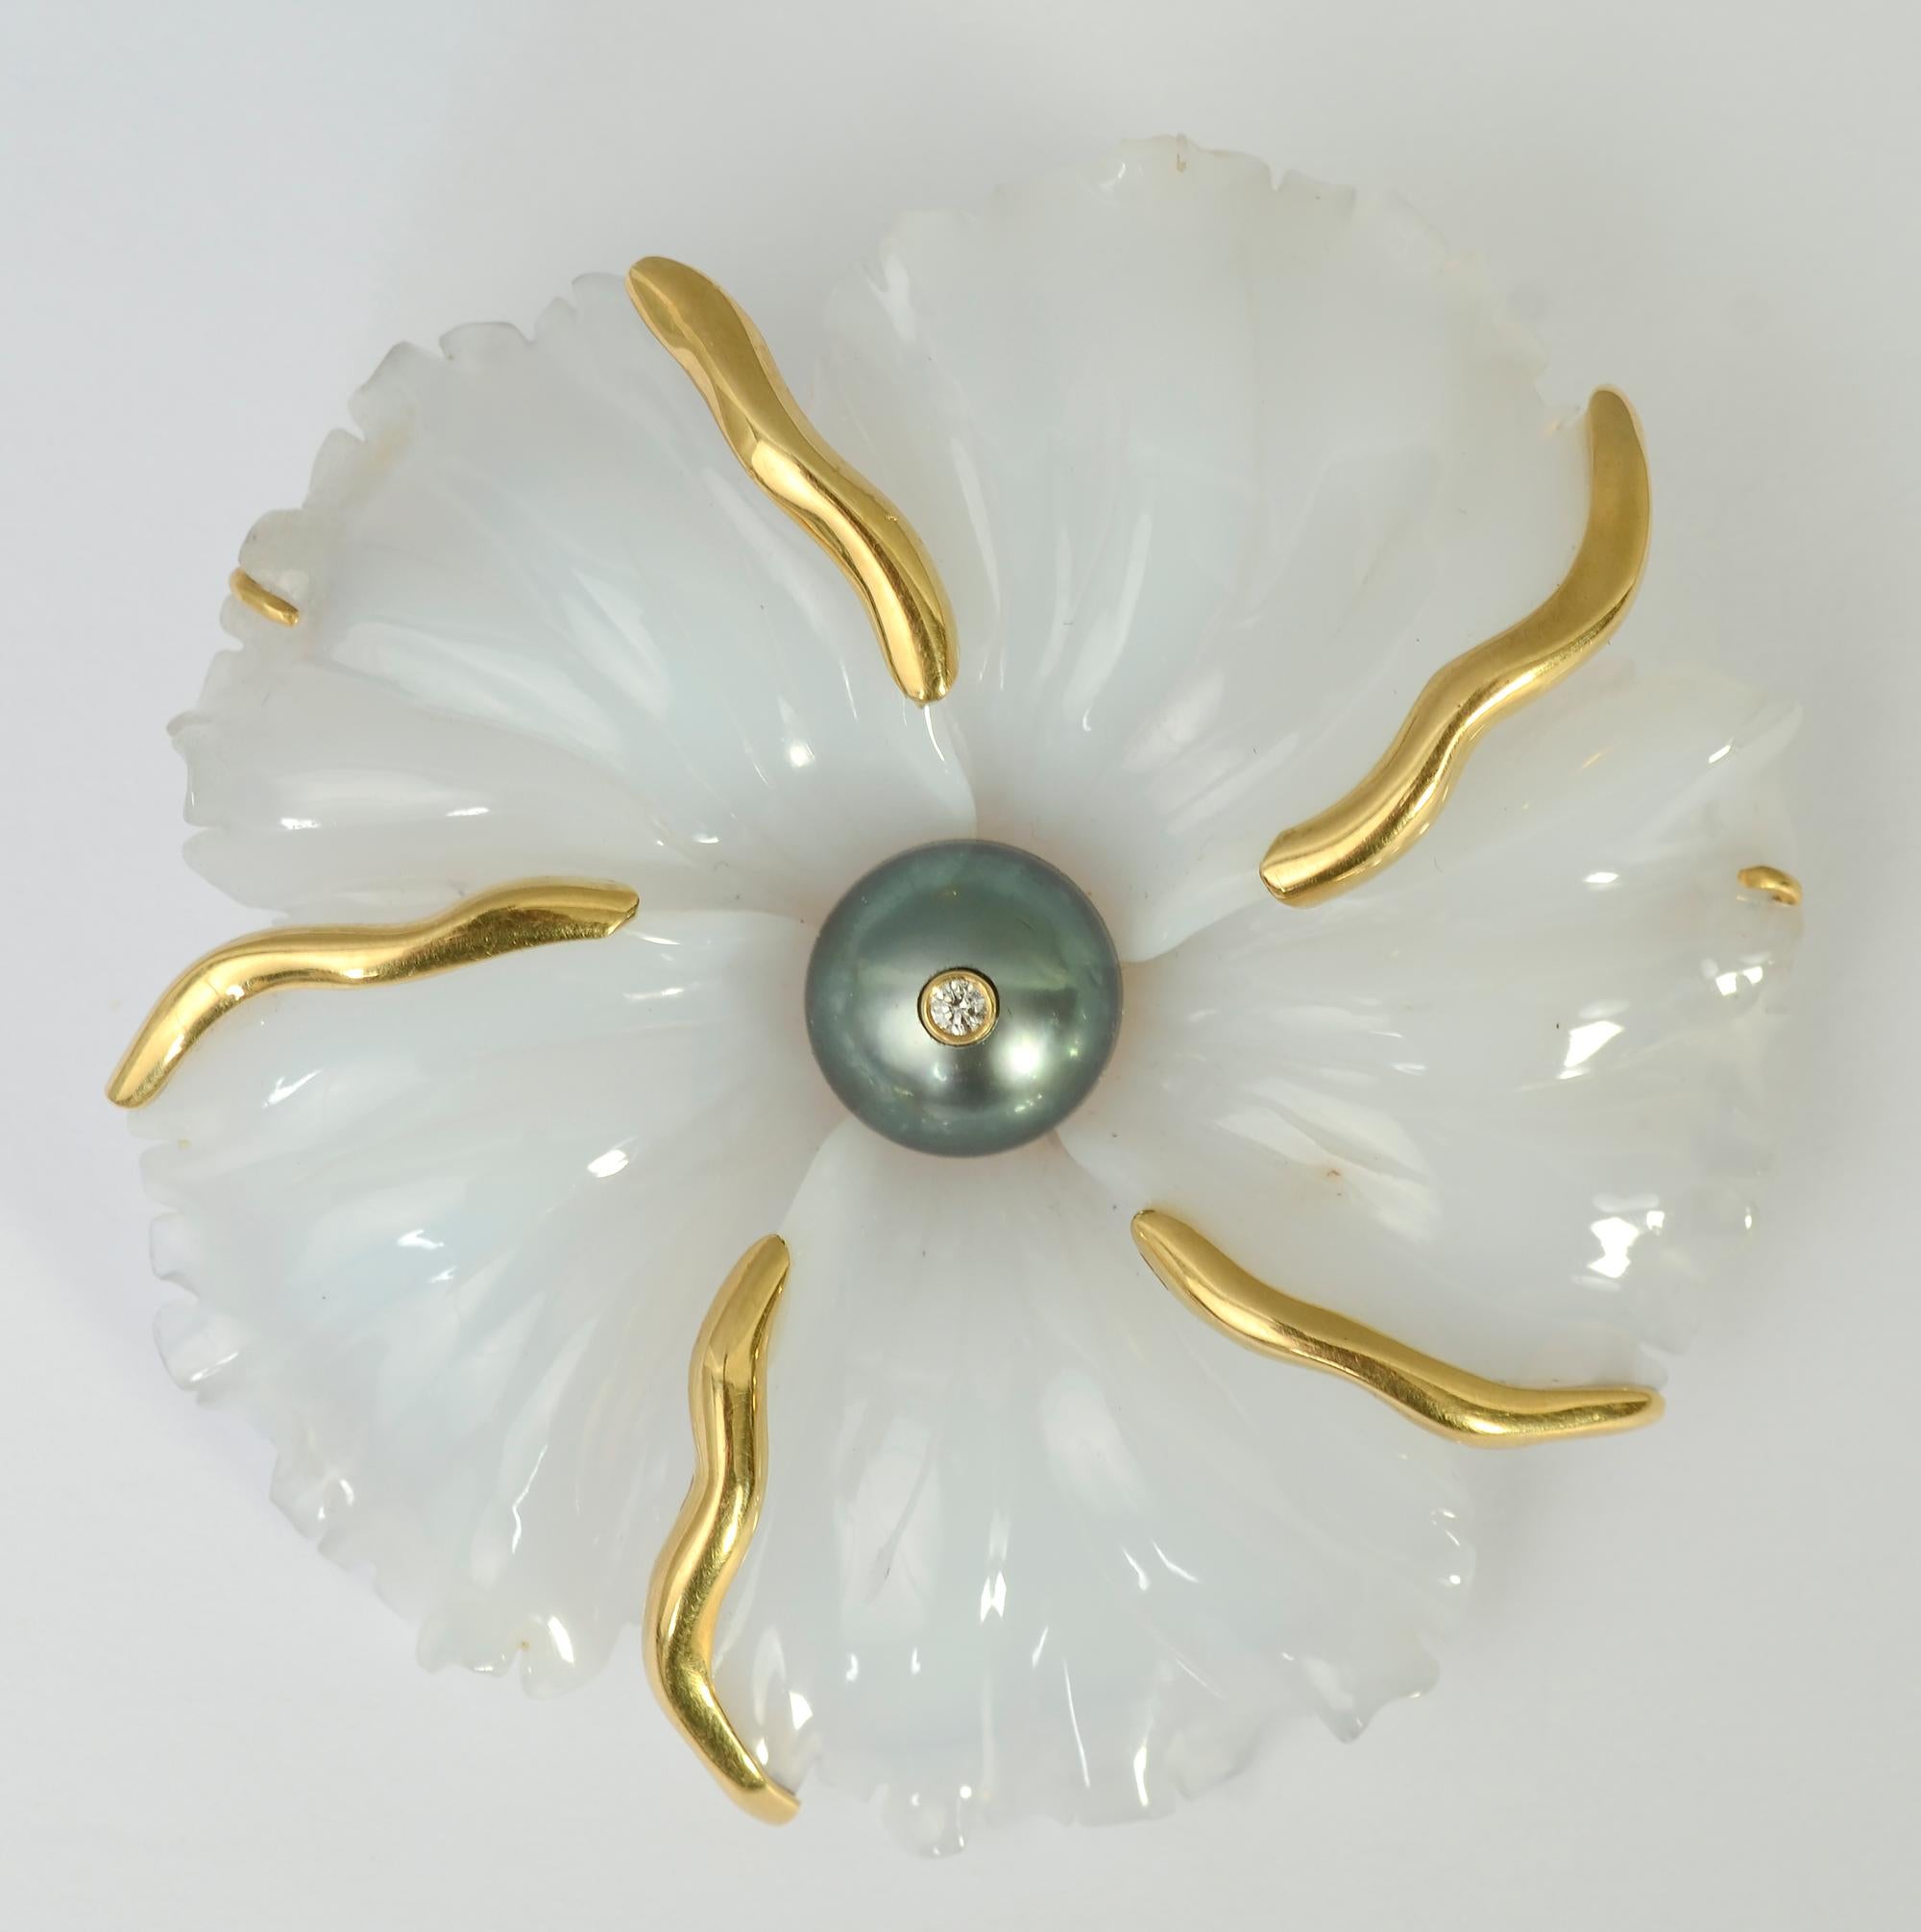 This carved flower brooch of white agate by Andrew Clunn is as much a piece of sculpture as a piece of jewelry. It is beautifully carved with ruffled and folded edges and a totally sculptural quality. The entire piece is carved from one piece of